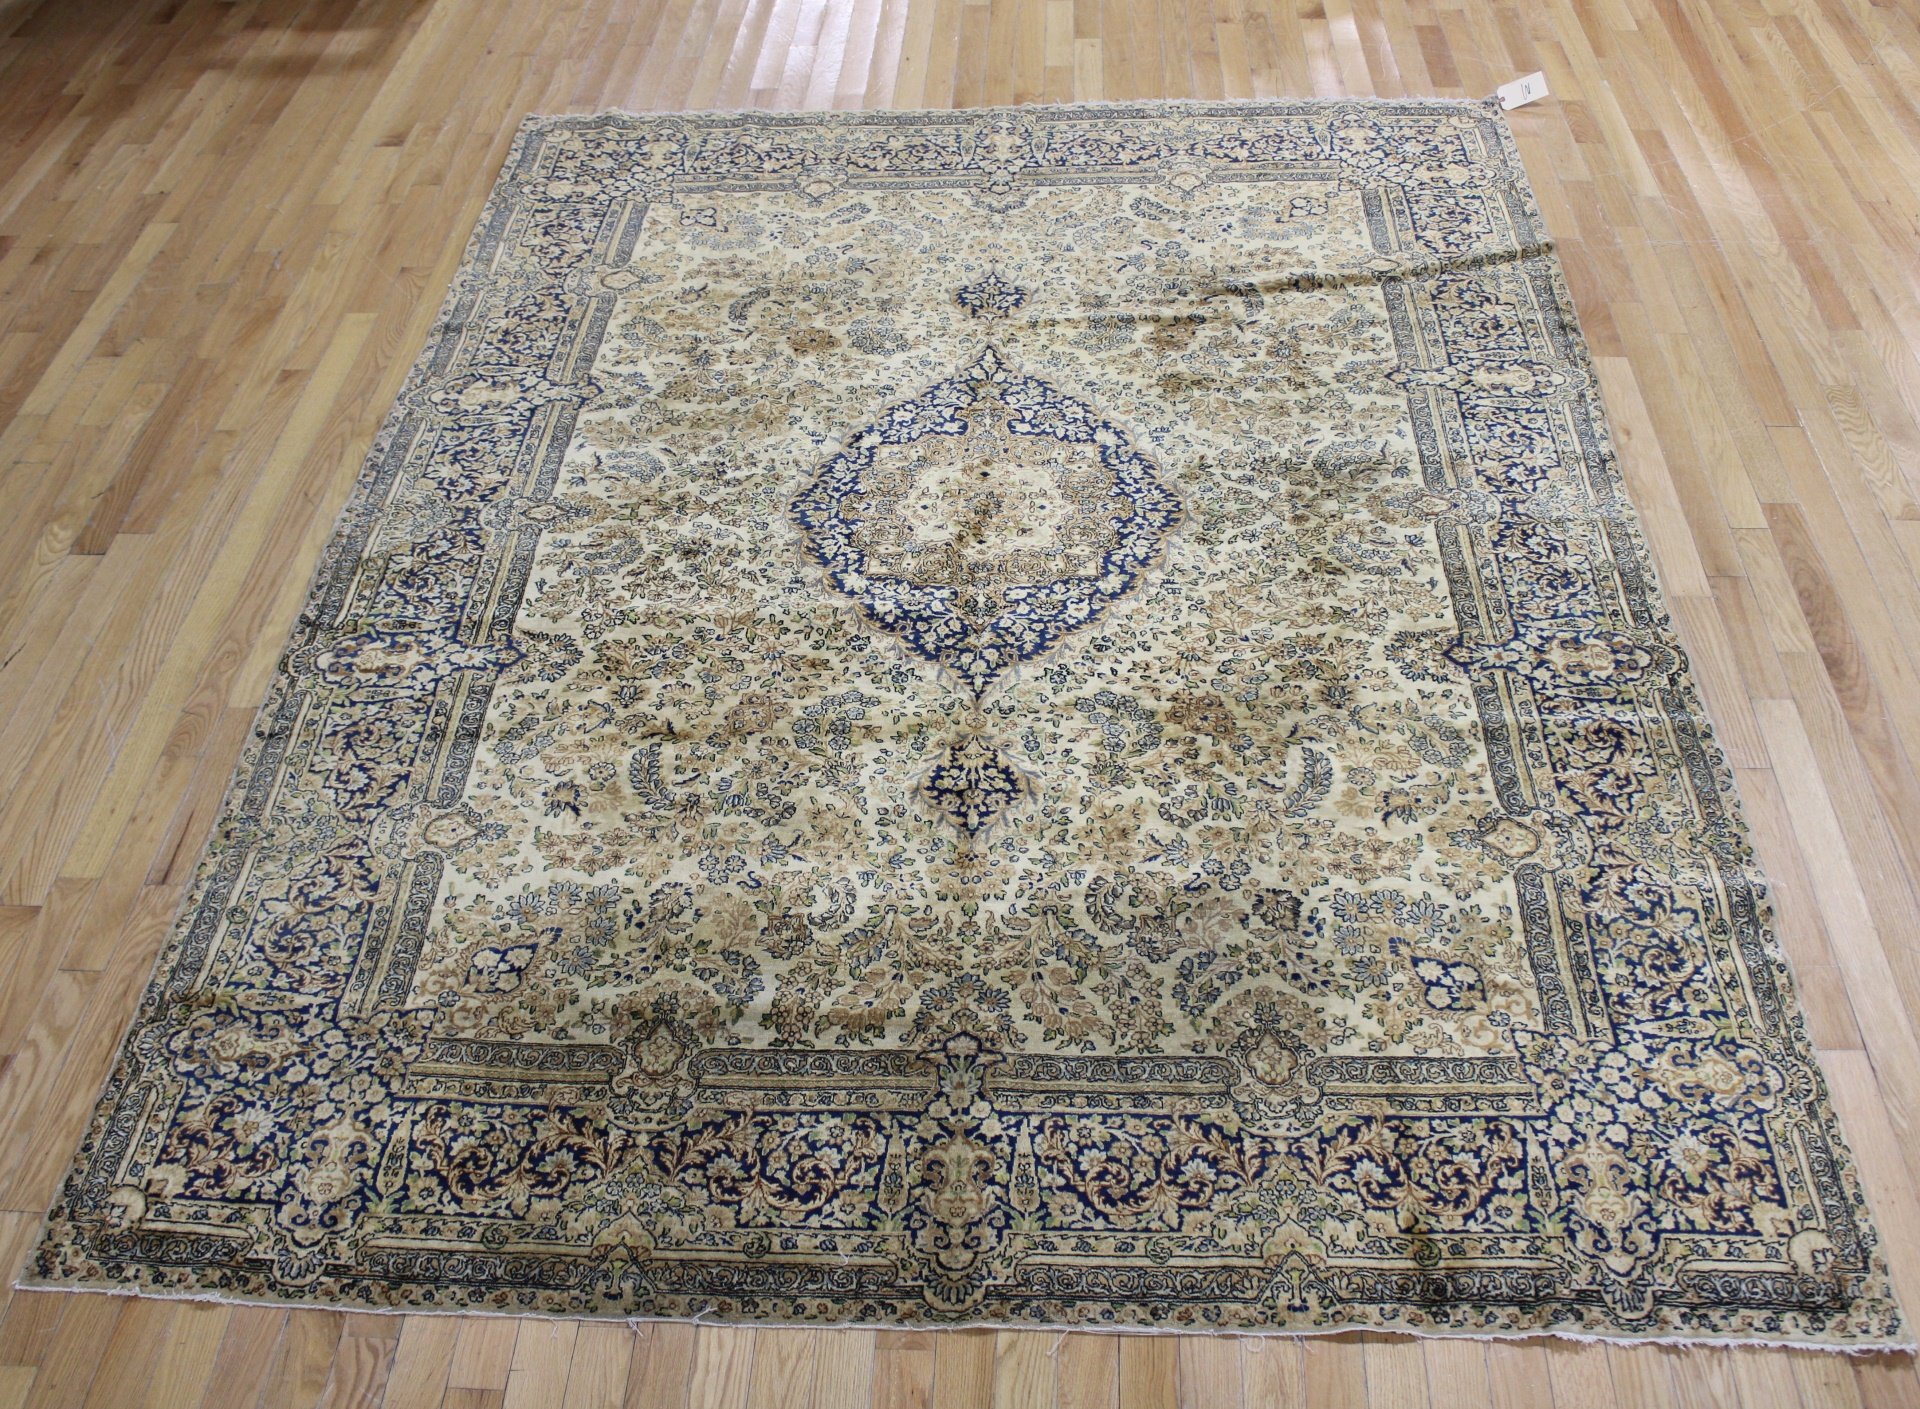 ANTIQUE AND FINELY HAND WOVEN LAVAR